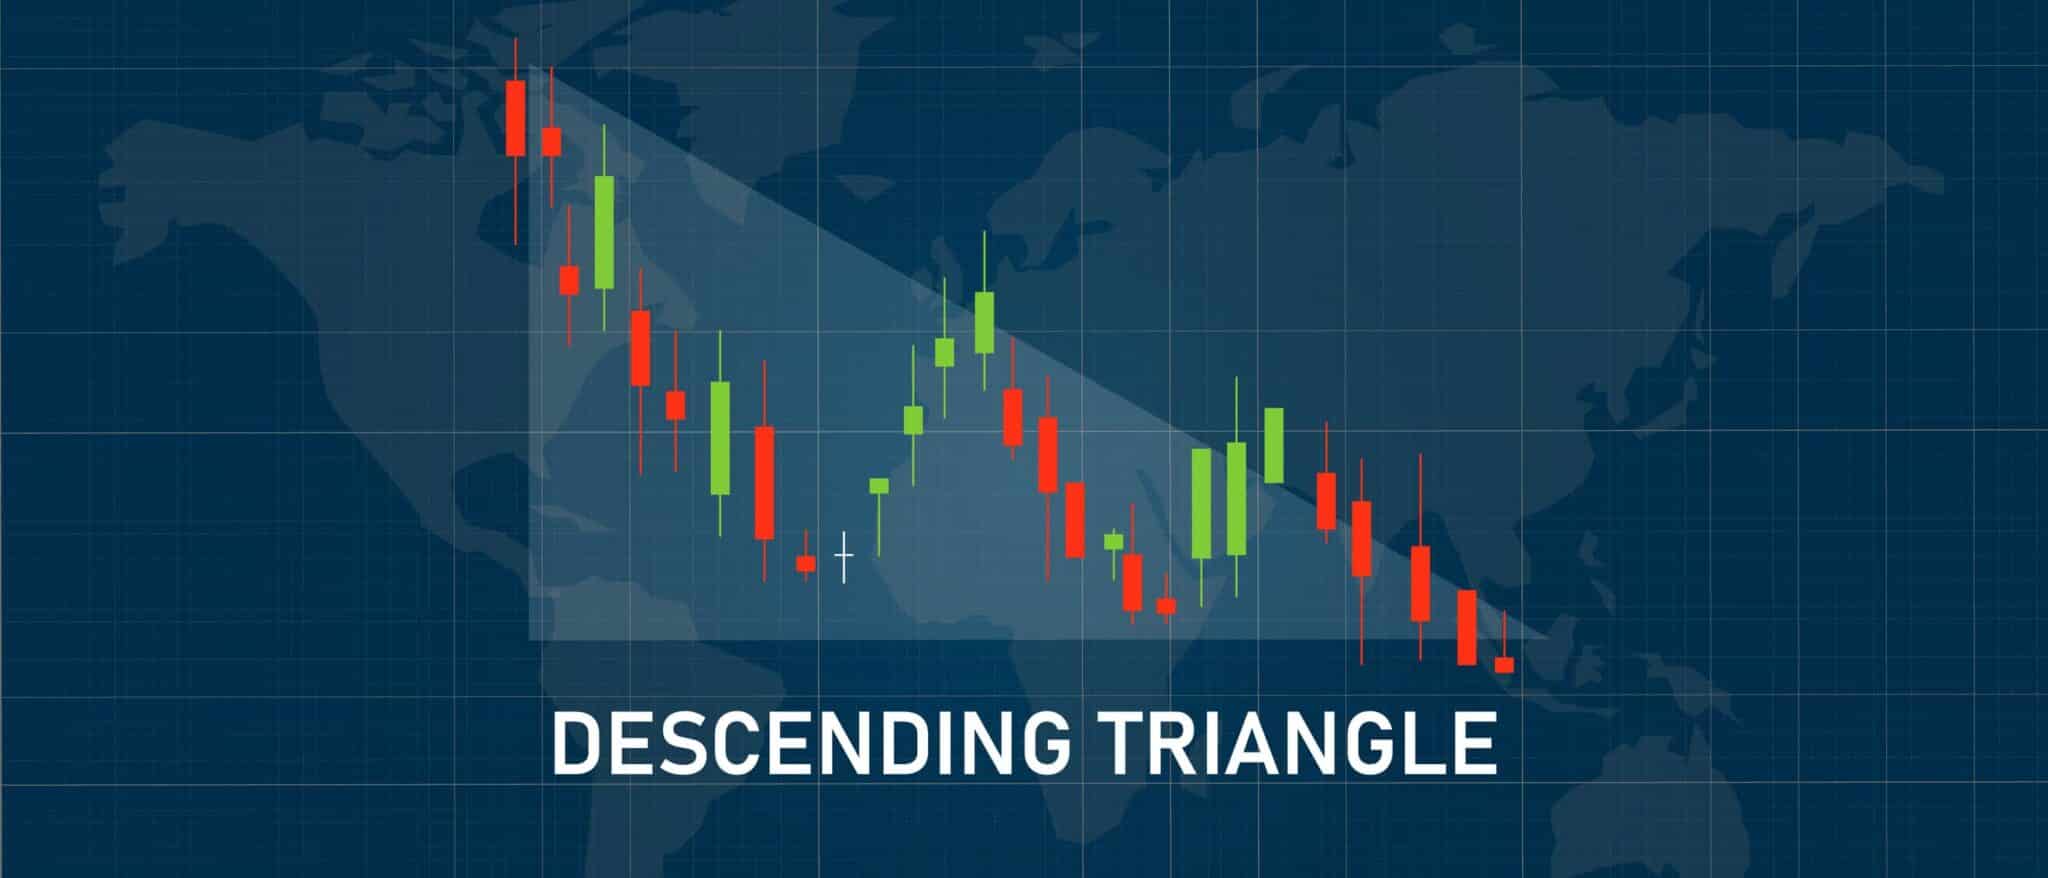 What is a Descending Triangle Pattern